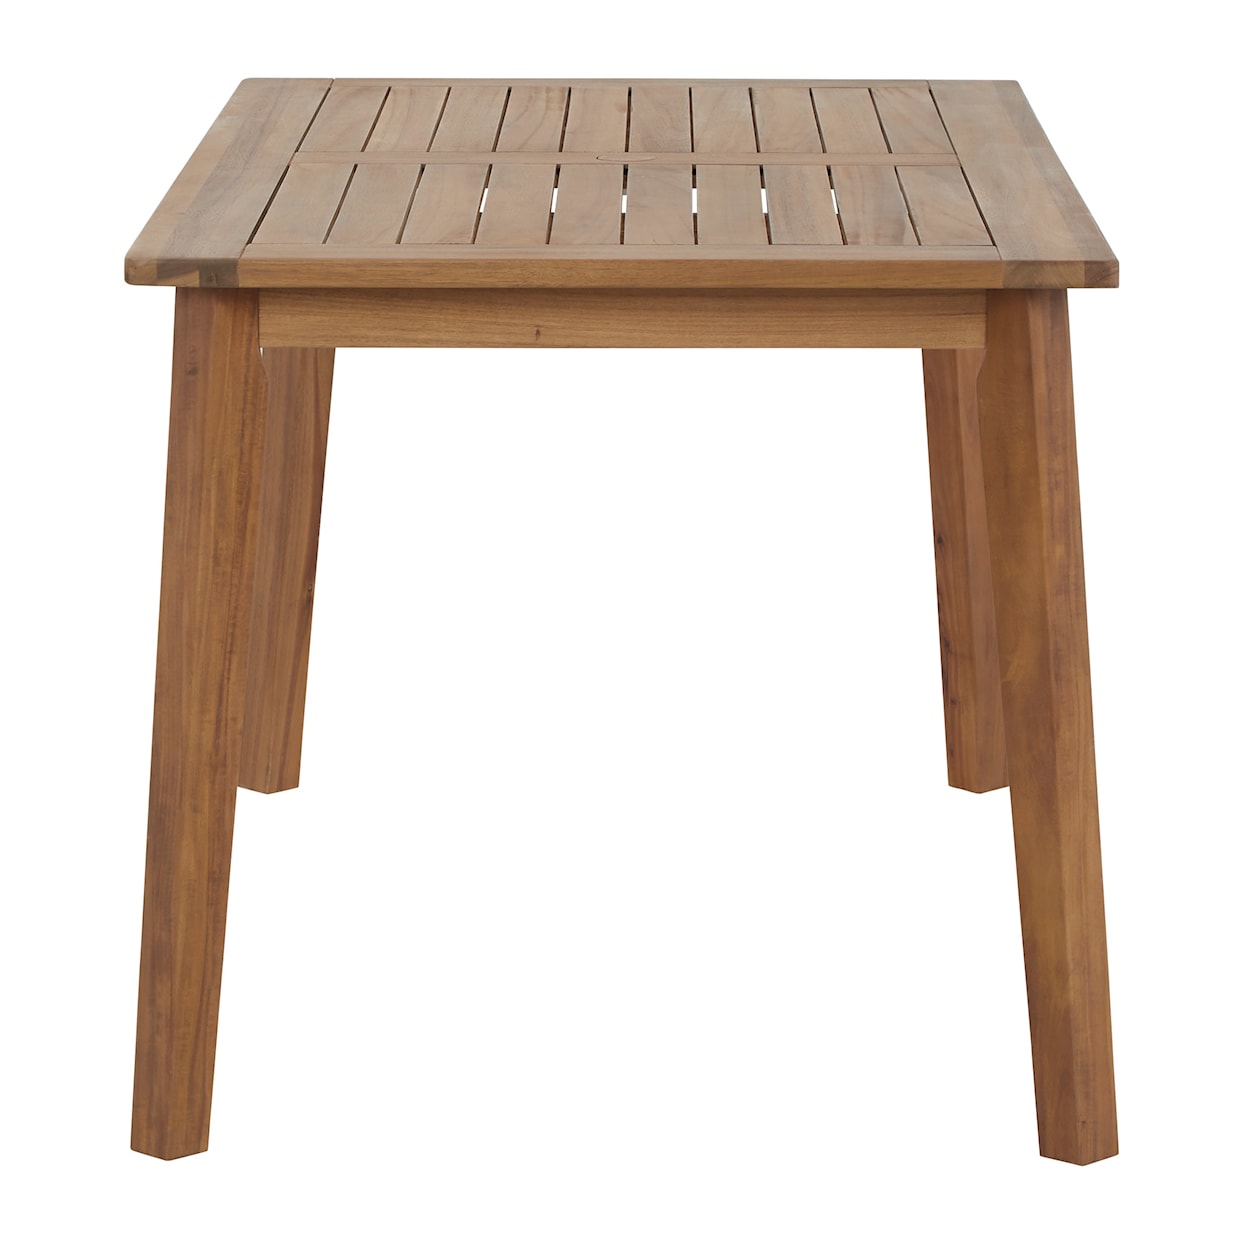 Signature Design Janiyah Outdoor Dining Table